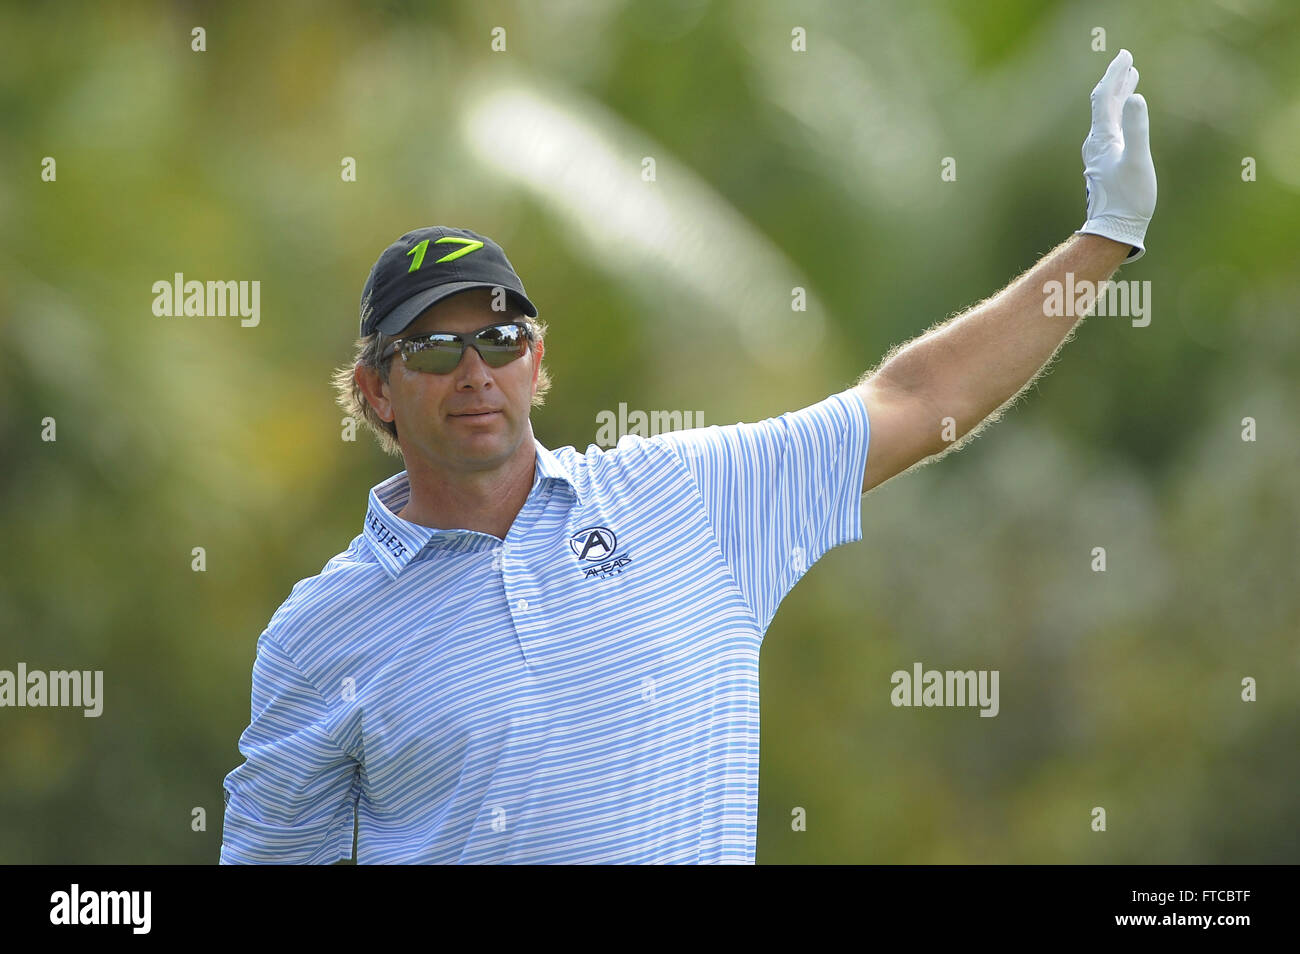 Doral, Fla, USA. 11th Mar, 2012. Retief Goosen during the final round of the World Golf Championship Cadillac Championship on the TPC Blue Monster Course at Doral Golf Resort And Spa on March 11, 2012 in Doral, Fla. ZUMA PRESS/ Scott A. Miller. © Scott A. Miller/ZUMA Wire/Alamy Live News Stock Photo